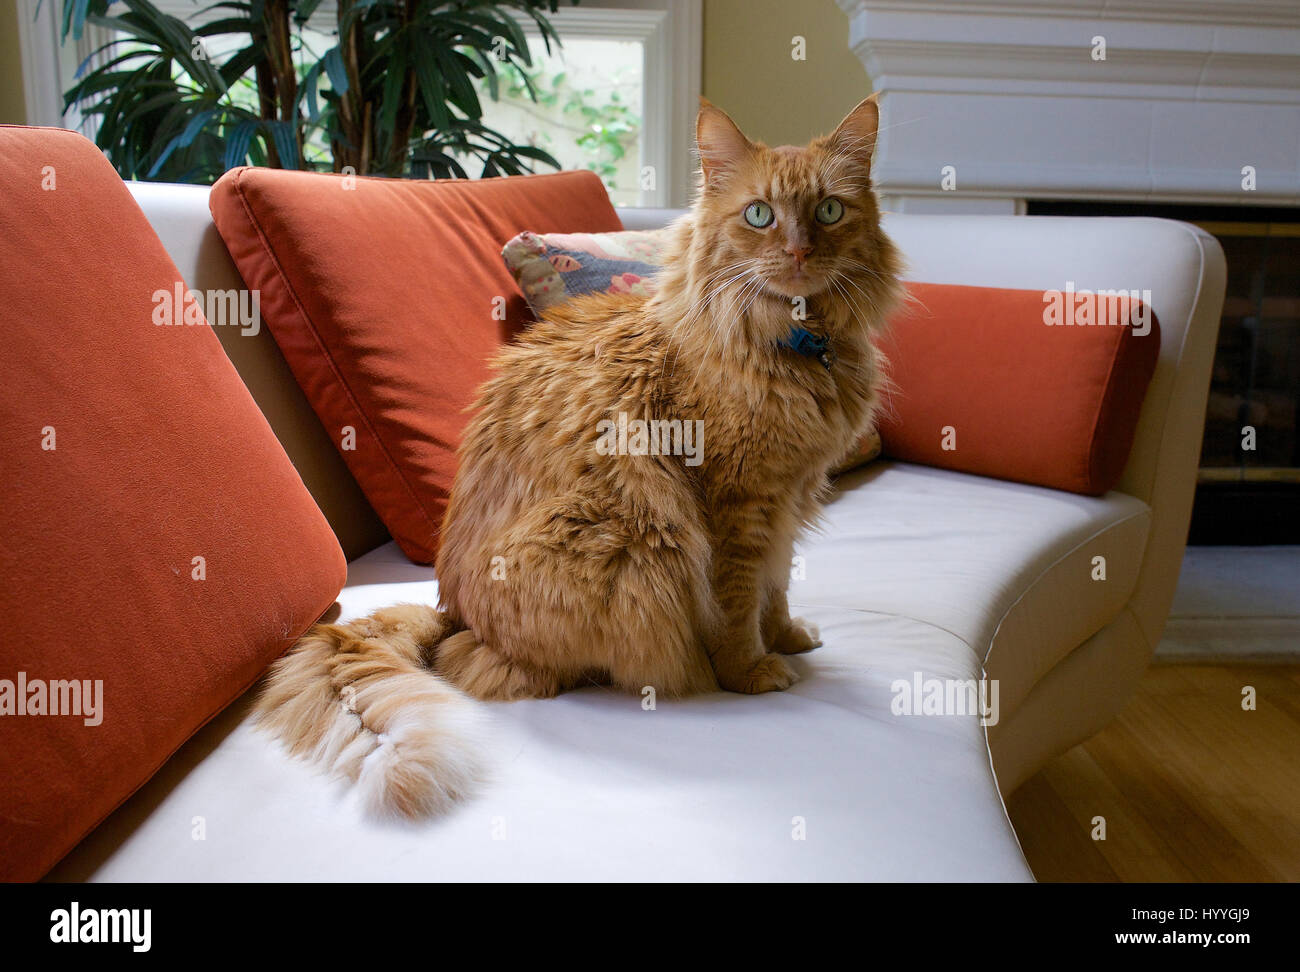 An orange house cat sitting on a modern leather chair. Stock Photo